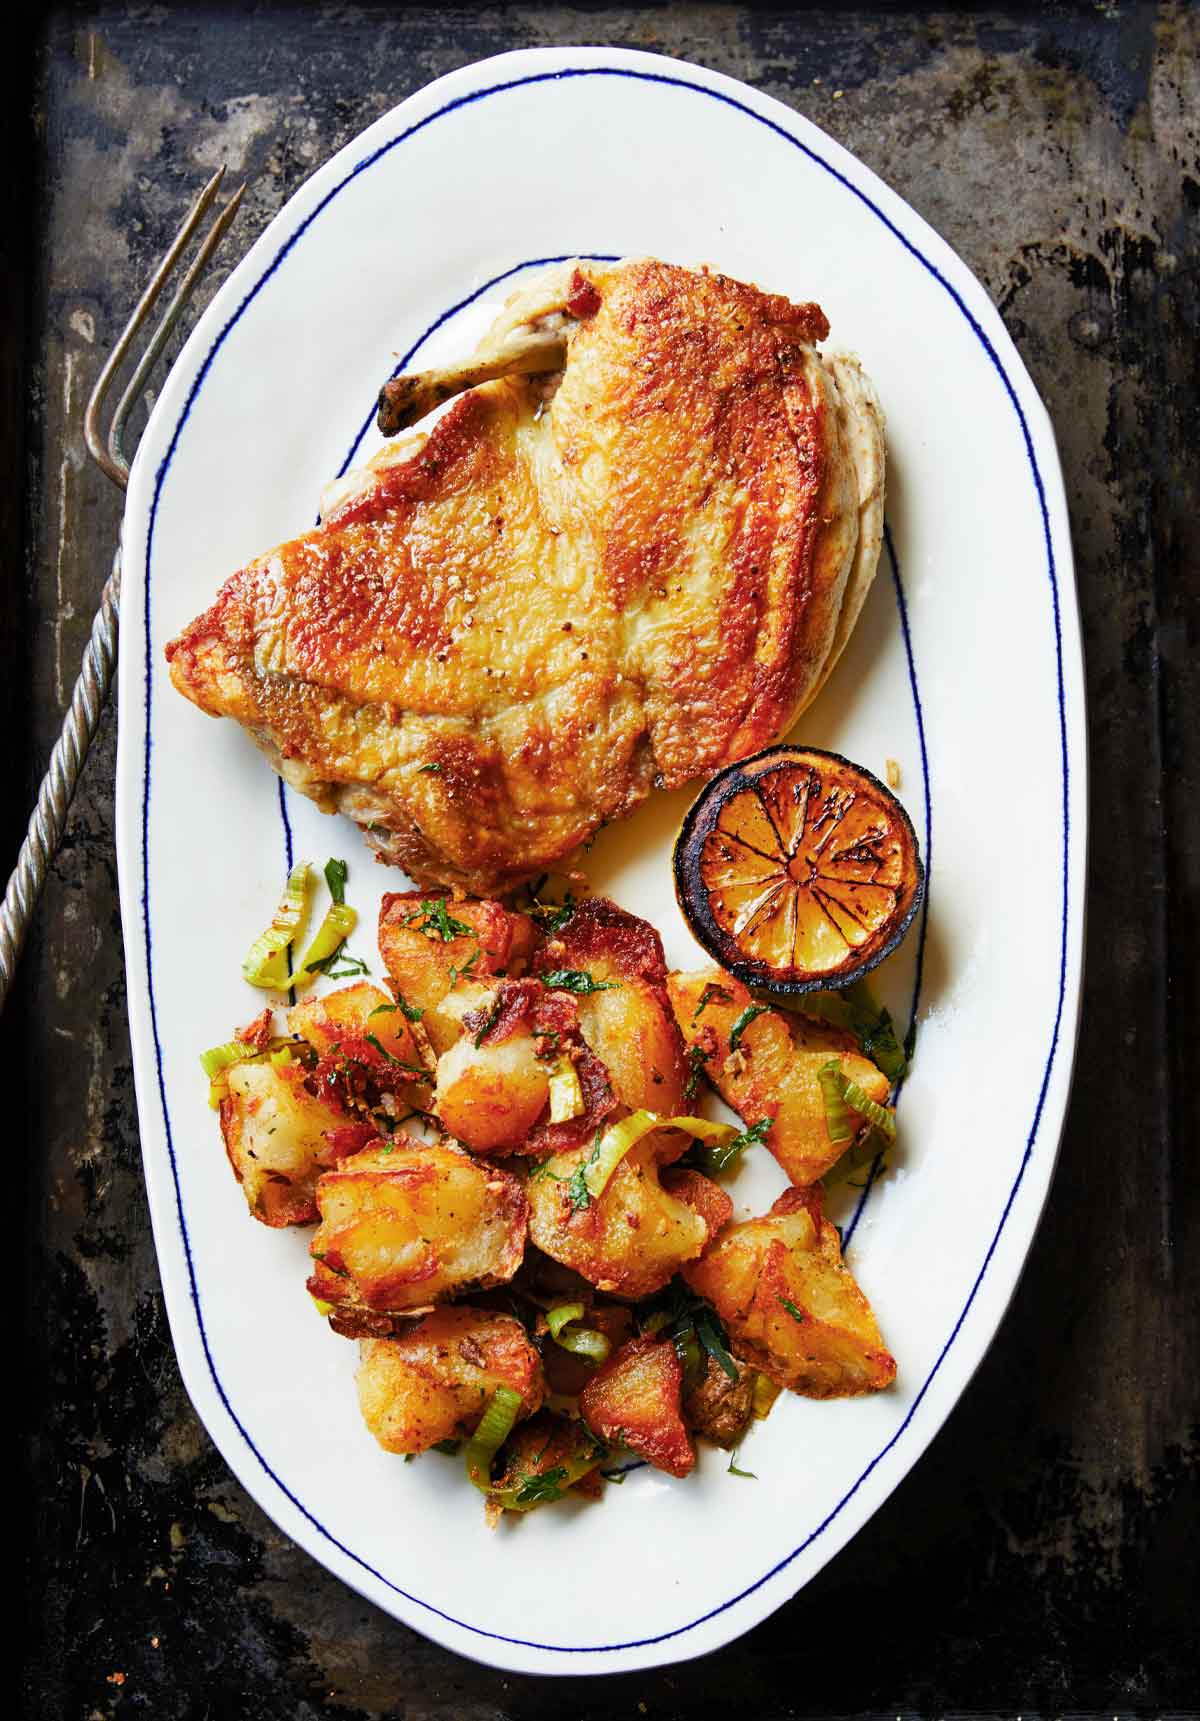 A piece of crisp roast chicken in a skillet on a plate with crispy potatoes and charred lemon.